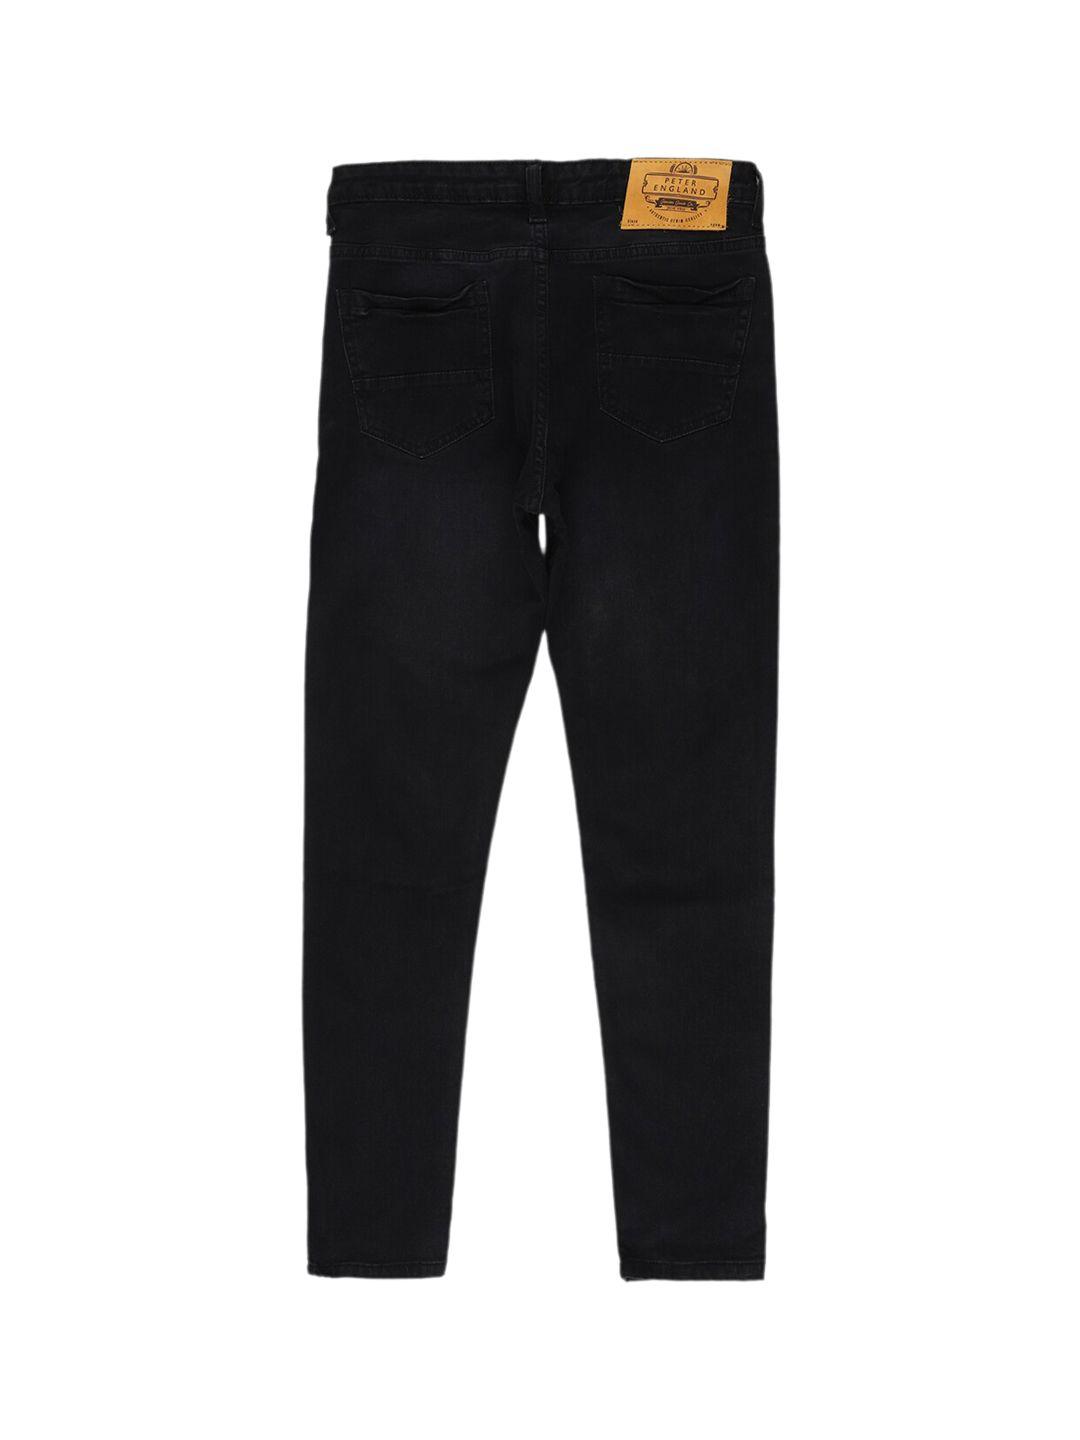 peter england boys black skinny fit pure cotton jeans